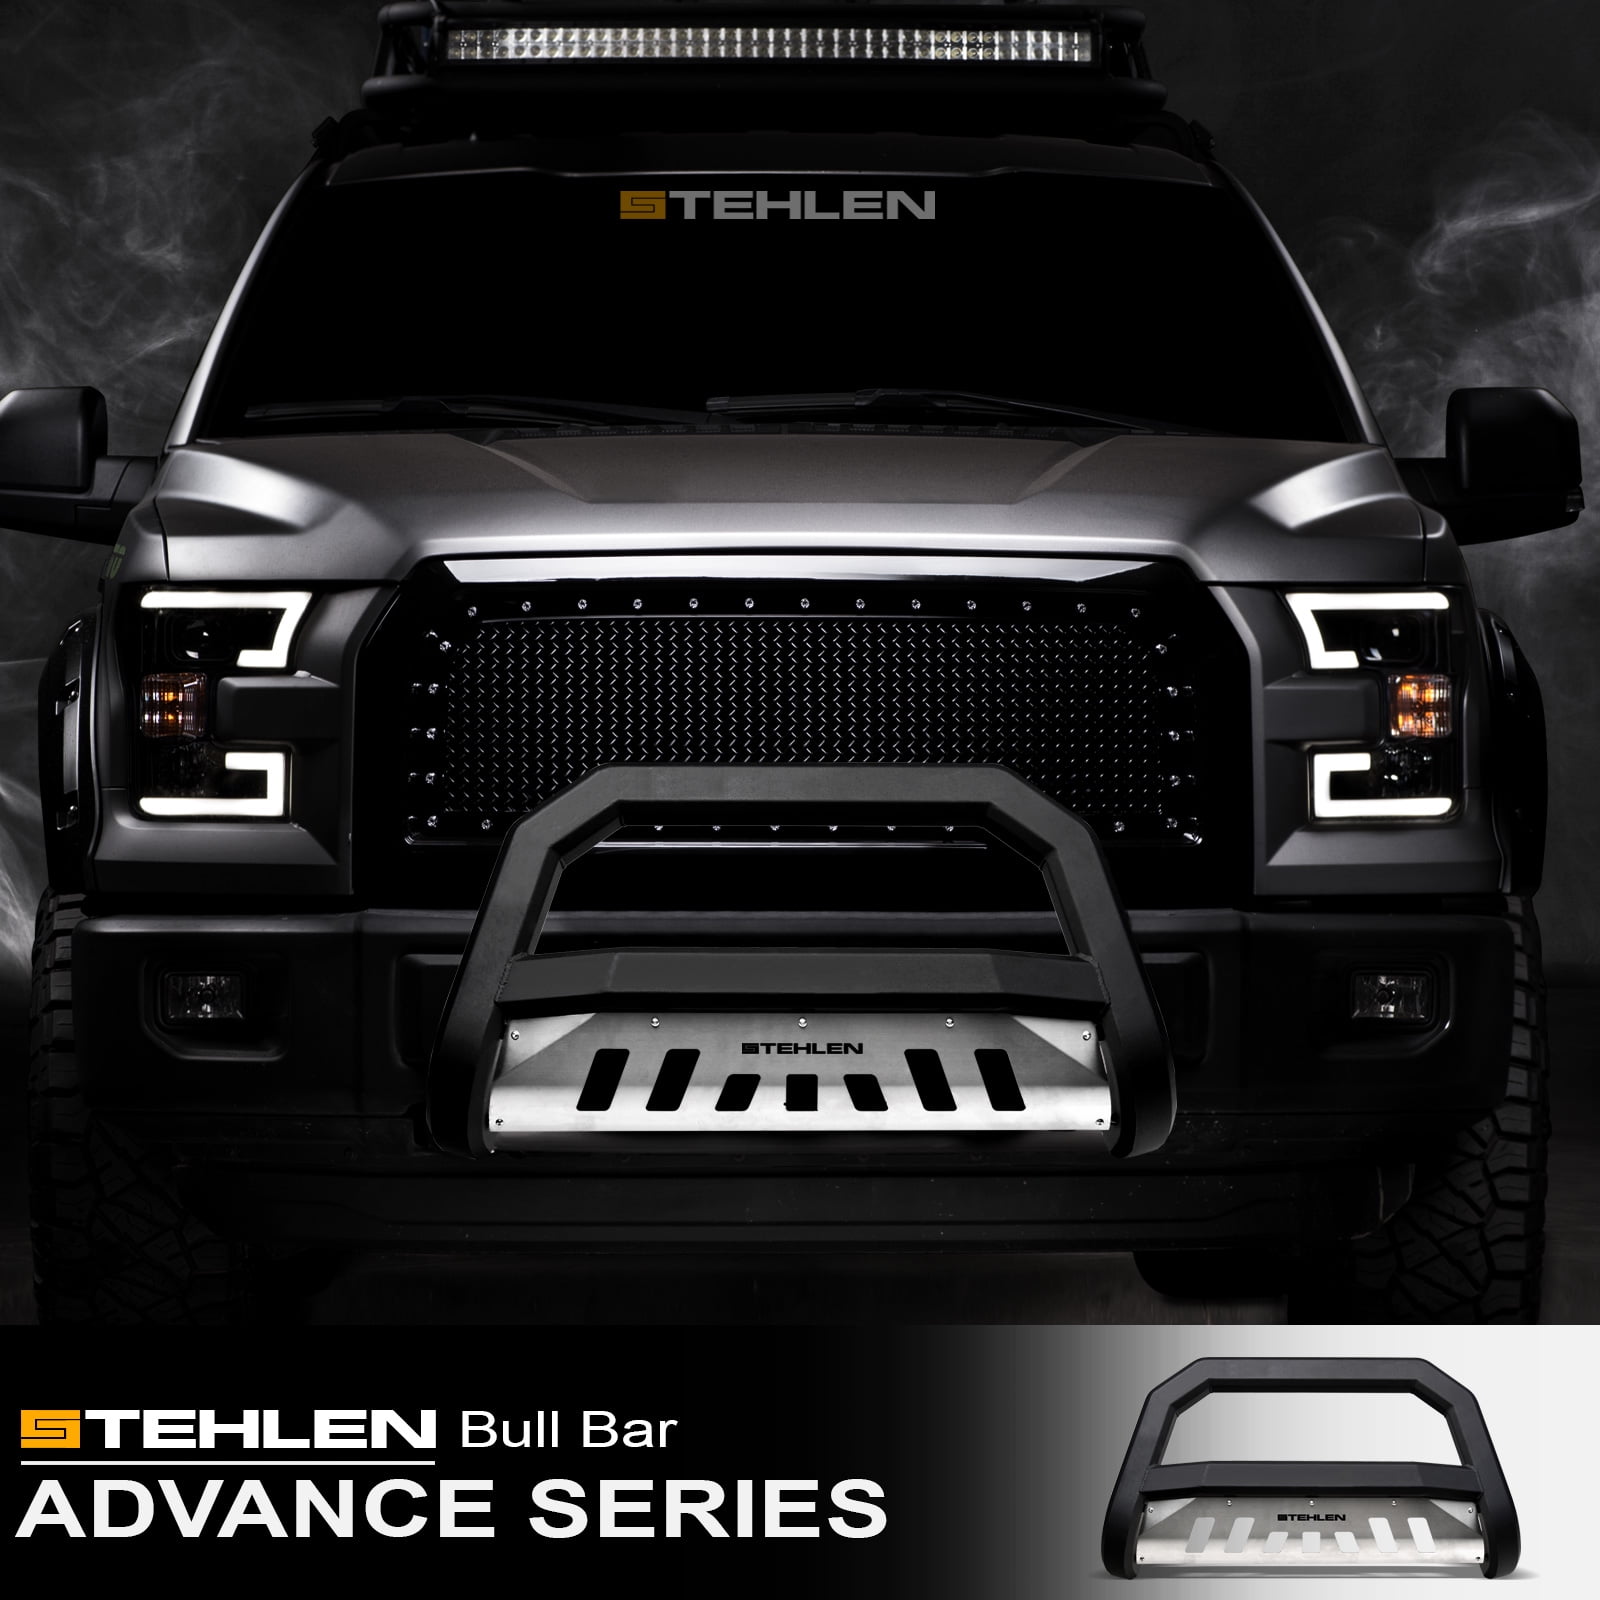 4X4TAG Premium Quality Matte Black Powder Coated Carbon Steel Bull Bar w//Brushed Skid Plate Fits Chevy//GMC Yukon 1995-1999 Bumper Grille Guard with Skid Plate and Optional Light Holes